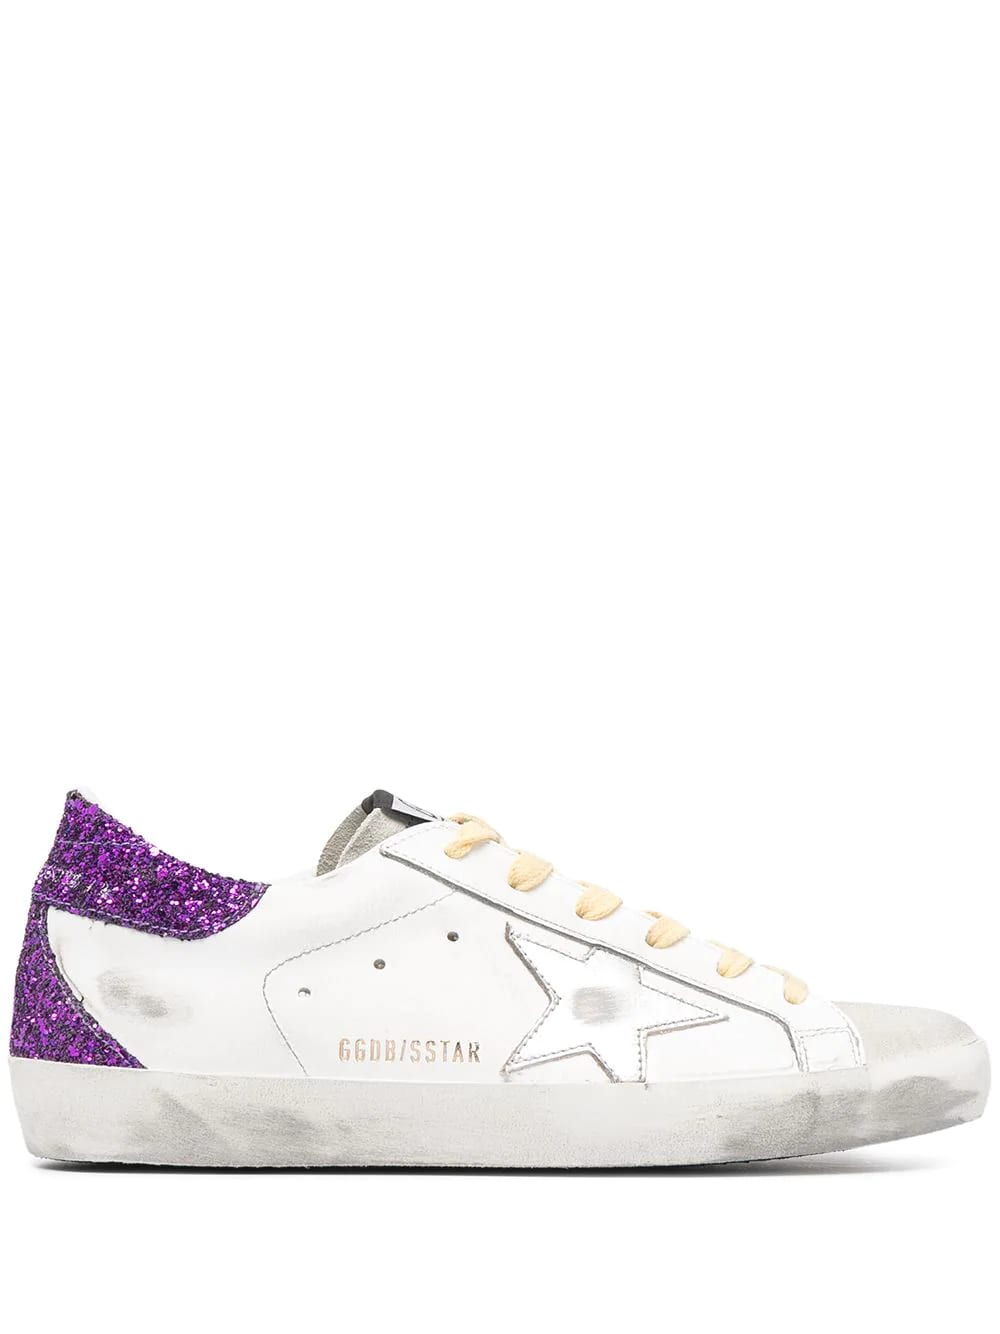 Golden Goose Woman White Super-star Sneakers With Silver Star, Yellow Laces And Purple Glitter Spoiler